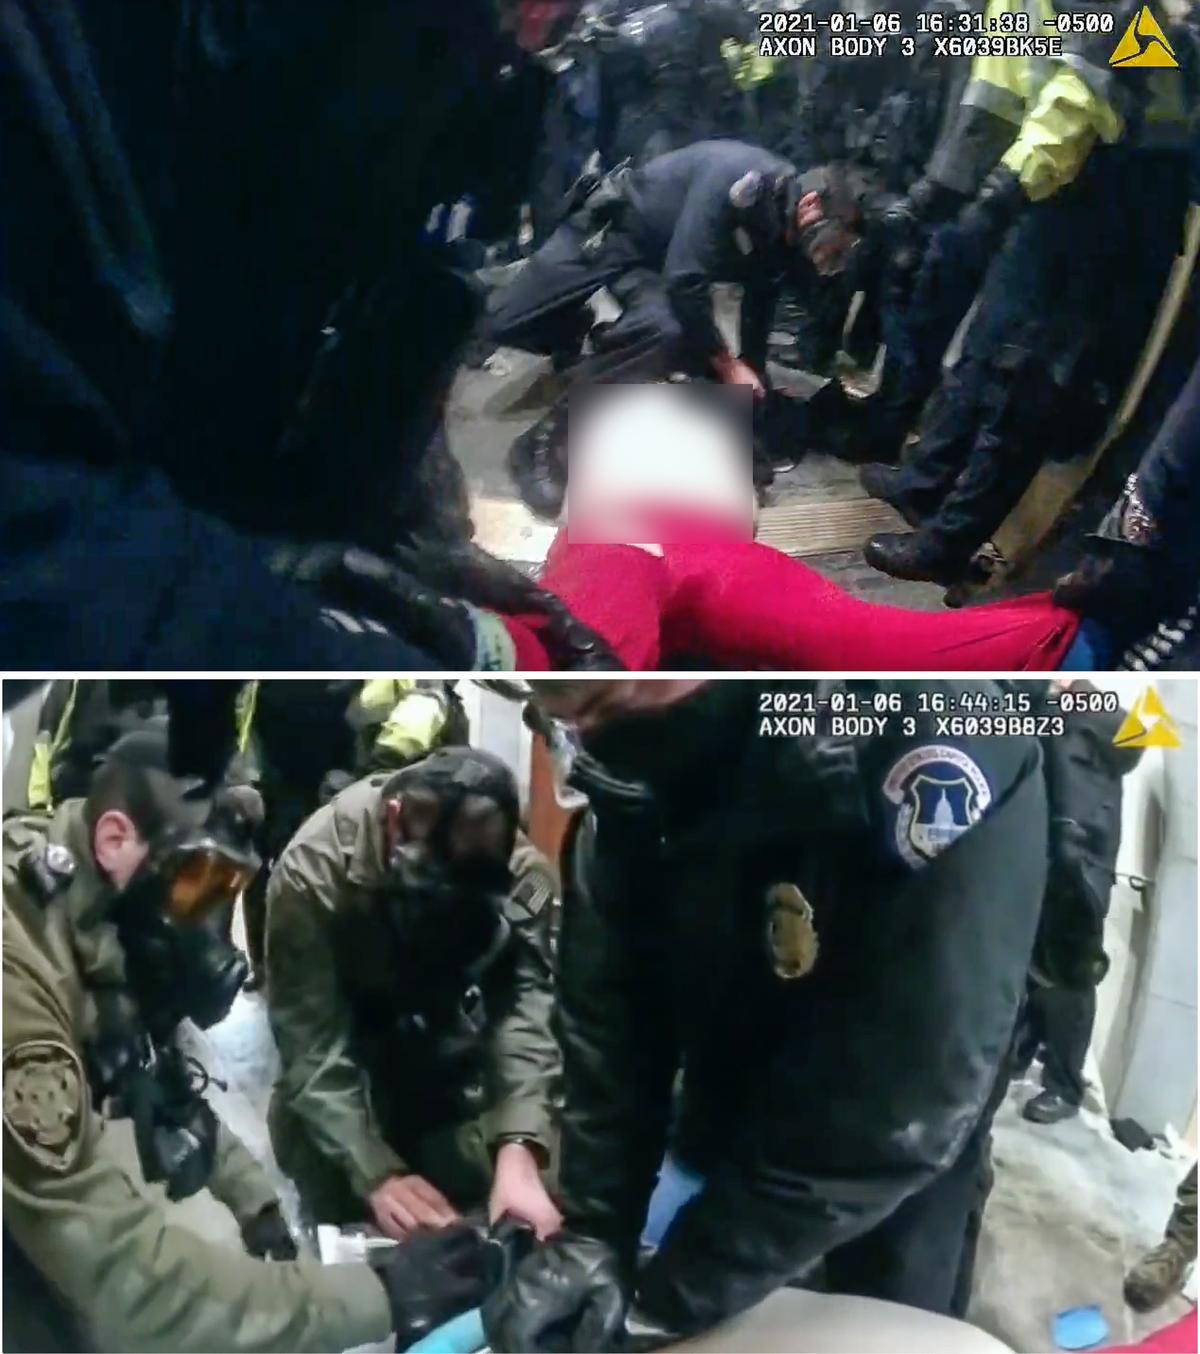 Above: A police officer slips and falls on an unconscious Rosanne Boyland as Officer Michael Dowling helps move her into the Capitol. Below: Medics work to insert a breathing tube as CPR continues on Jan. 6, 2021. (Metropolitan Police Department/Screenshots via The Epoch Times)